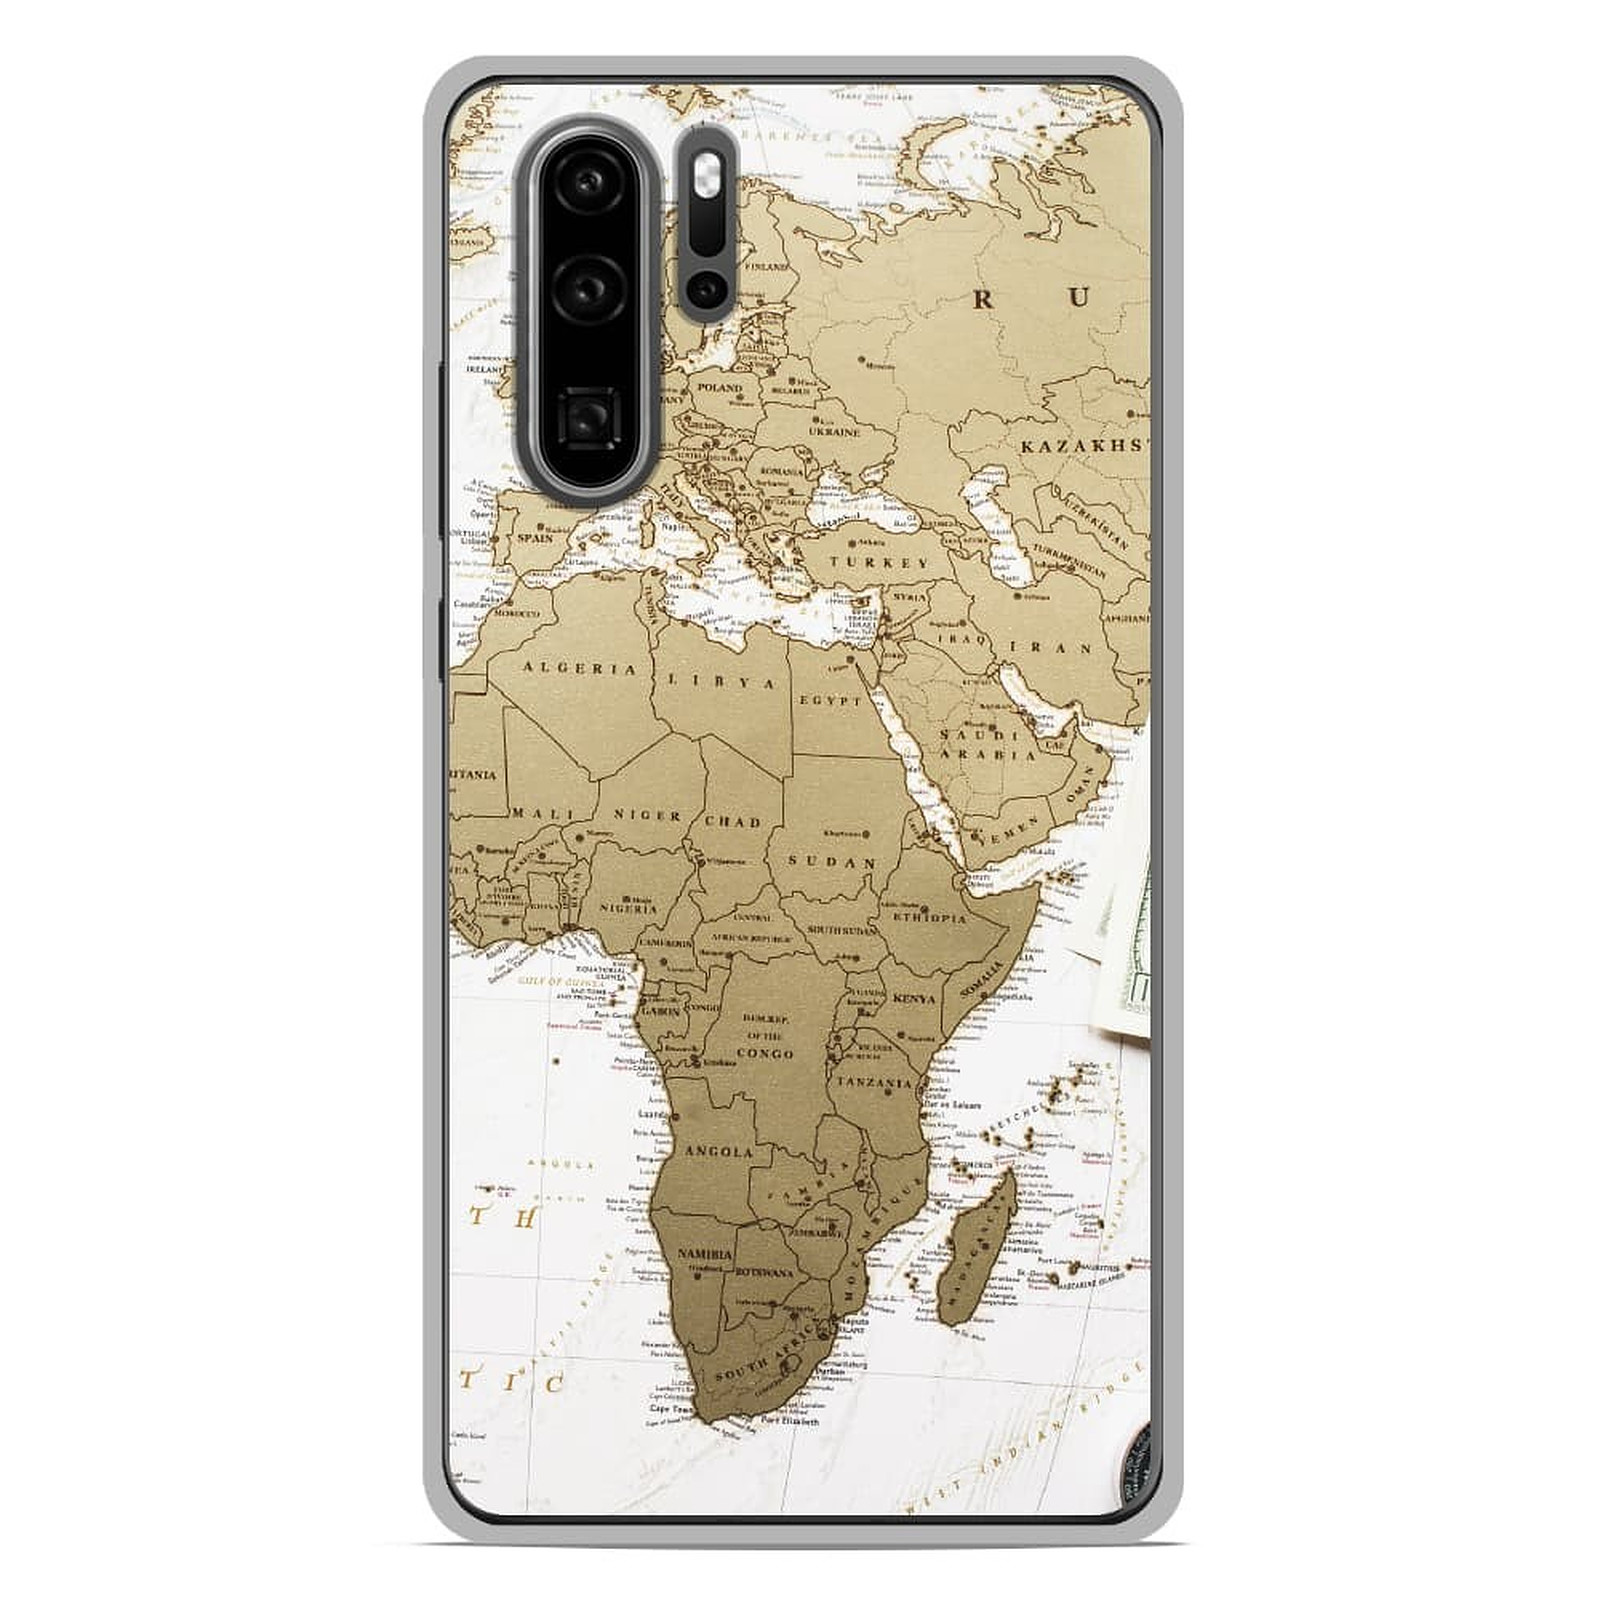 1001 Coques Coque silicone gel Huawei P30 Pro motif Map Europe Afrique - Coque telephone 1001Coques